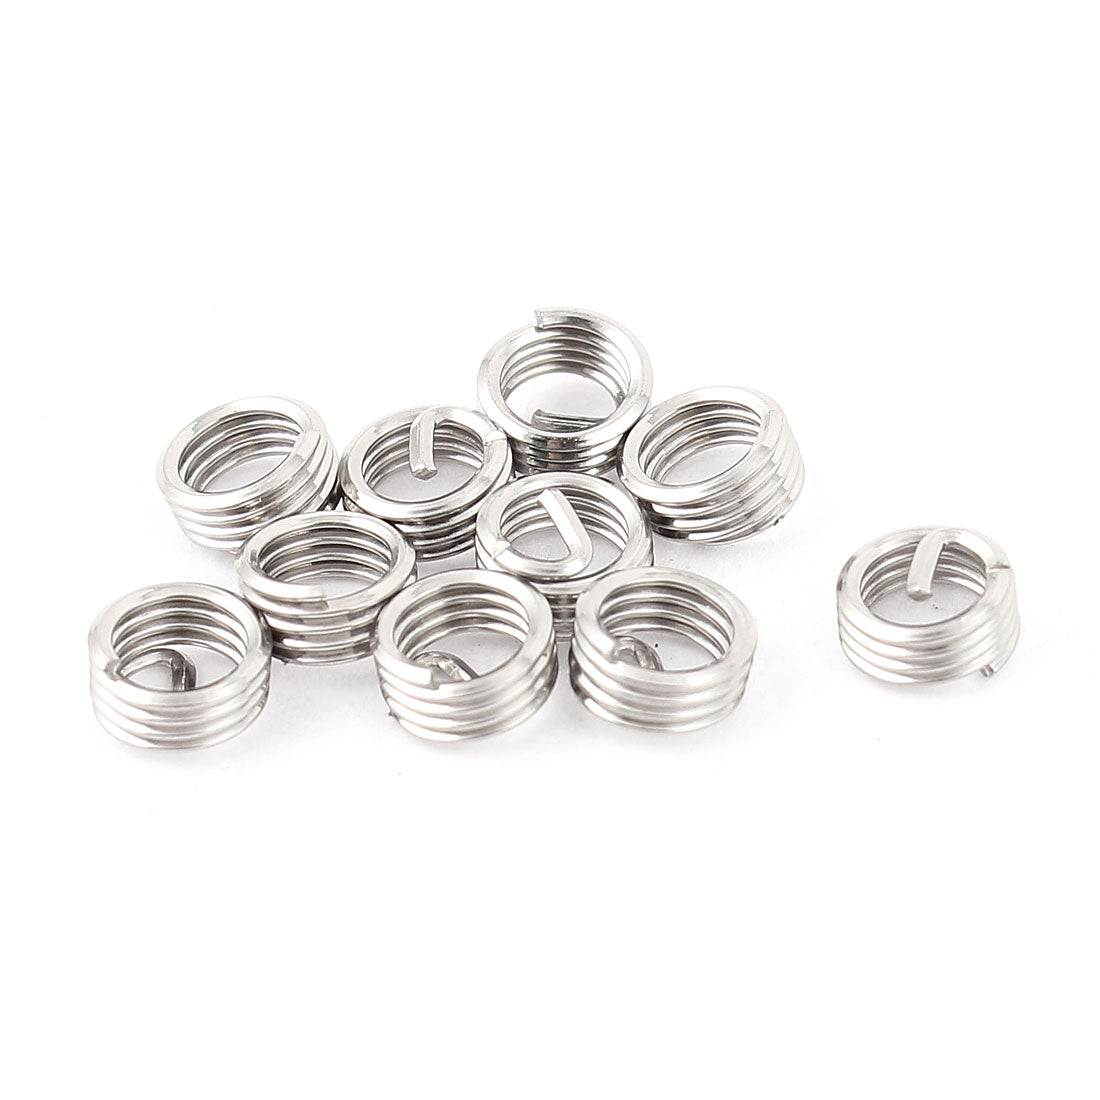 uxcell Uxcell 10Pcs 304 Stainless Steel Helicoil Wire Thread Repair Inserts M5 x 0.8mm x 1D